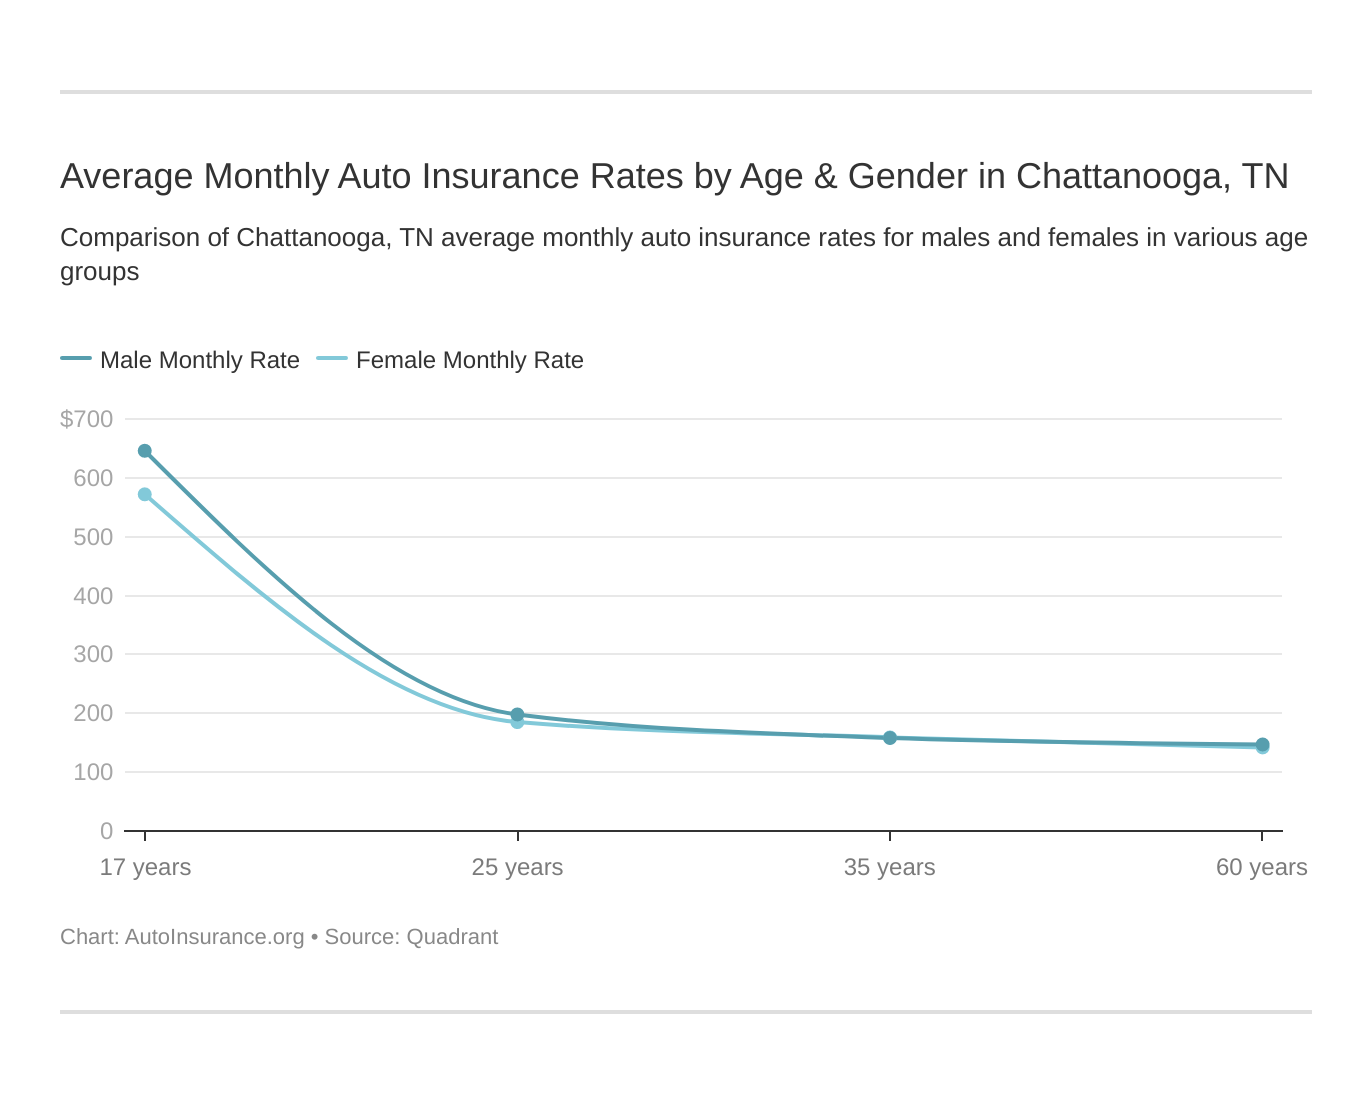 Average Monthly Auto Insurance Rates by Age & Gender in Chattanooga, TN